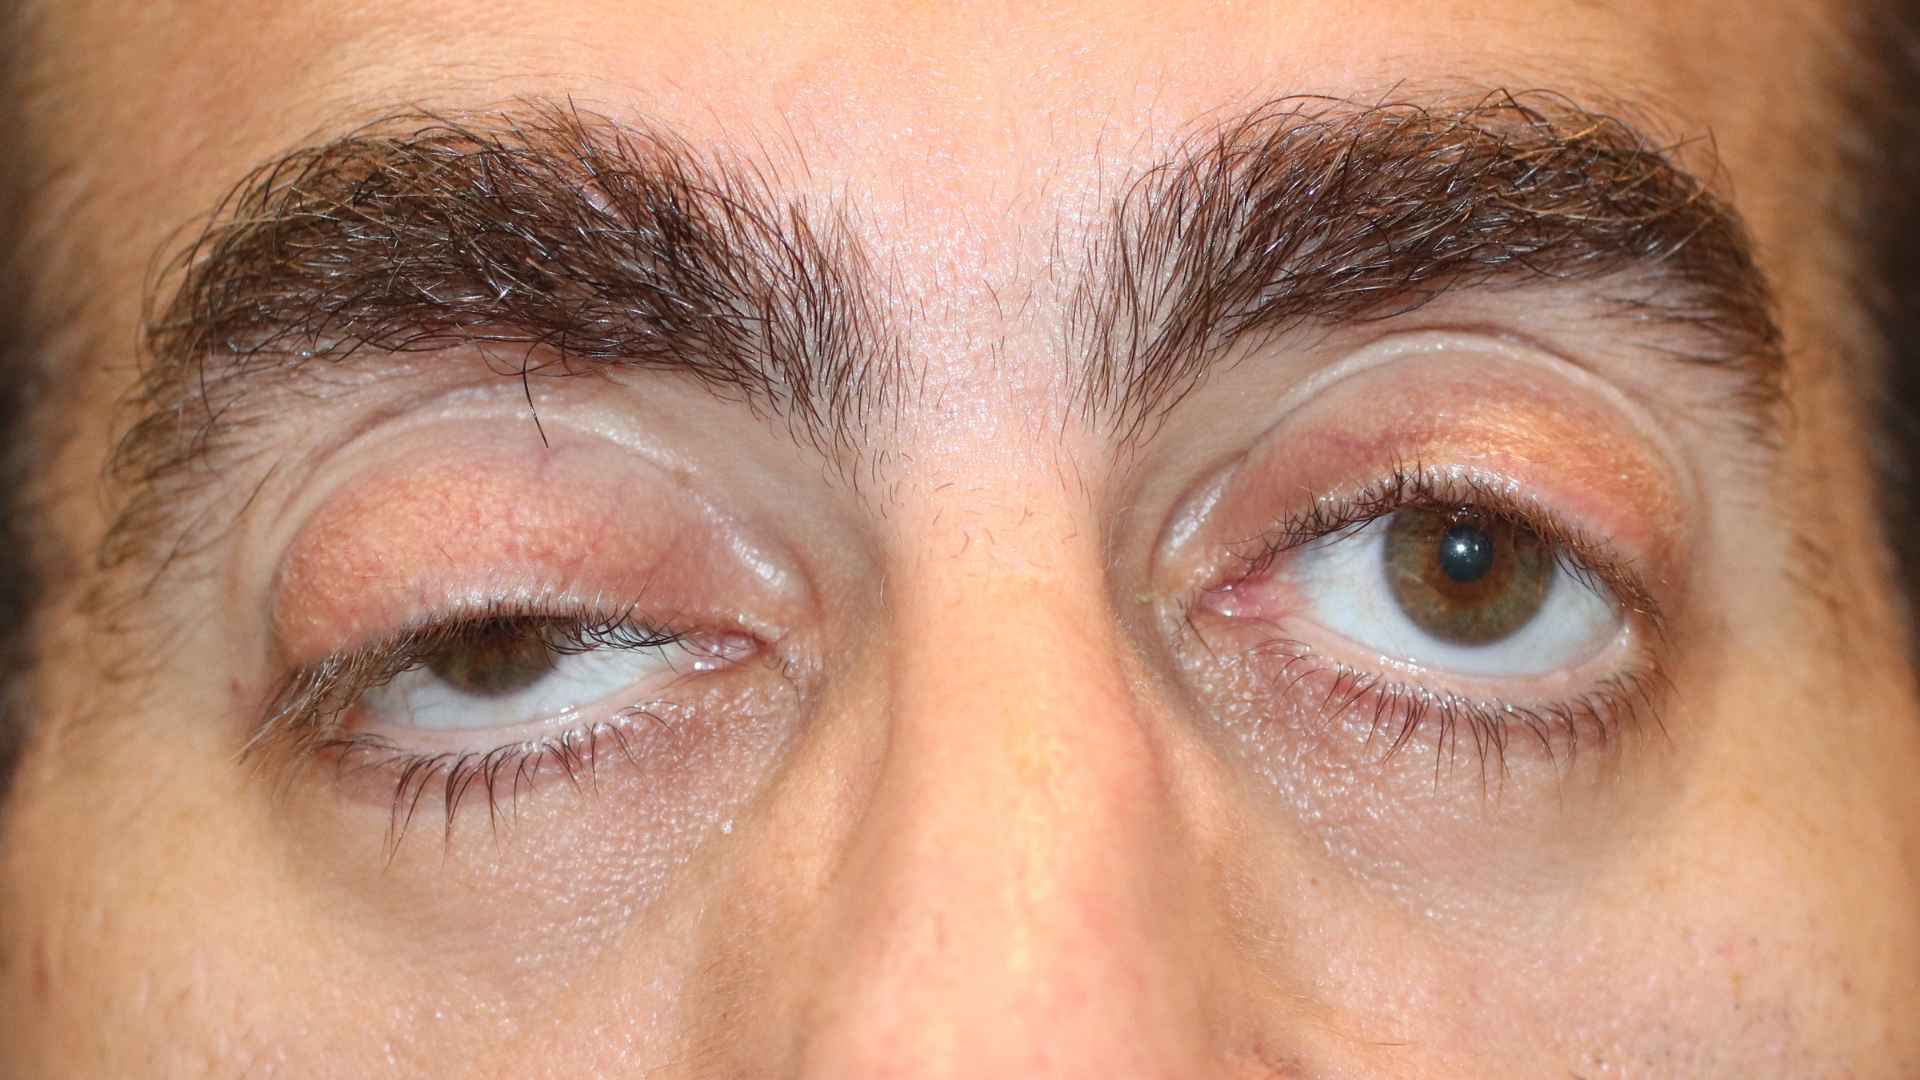 ptosis on one side requiring surgery by Dr Anthony Maloof.